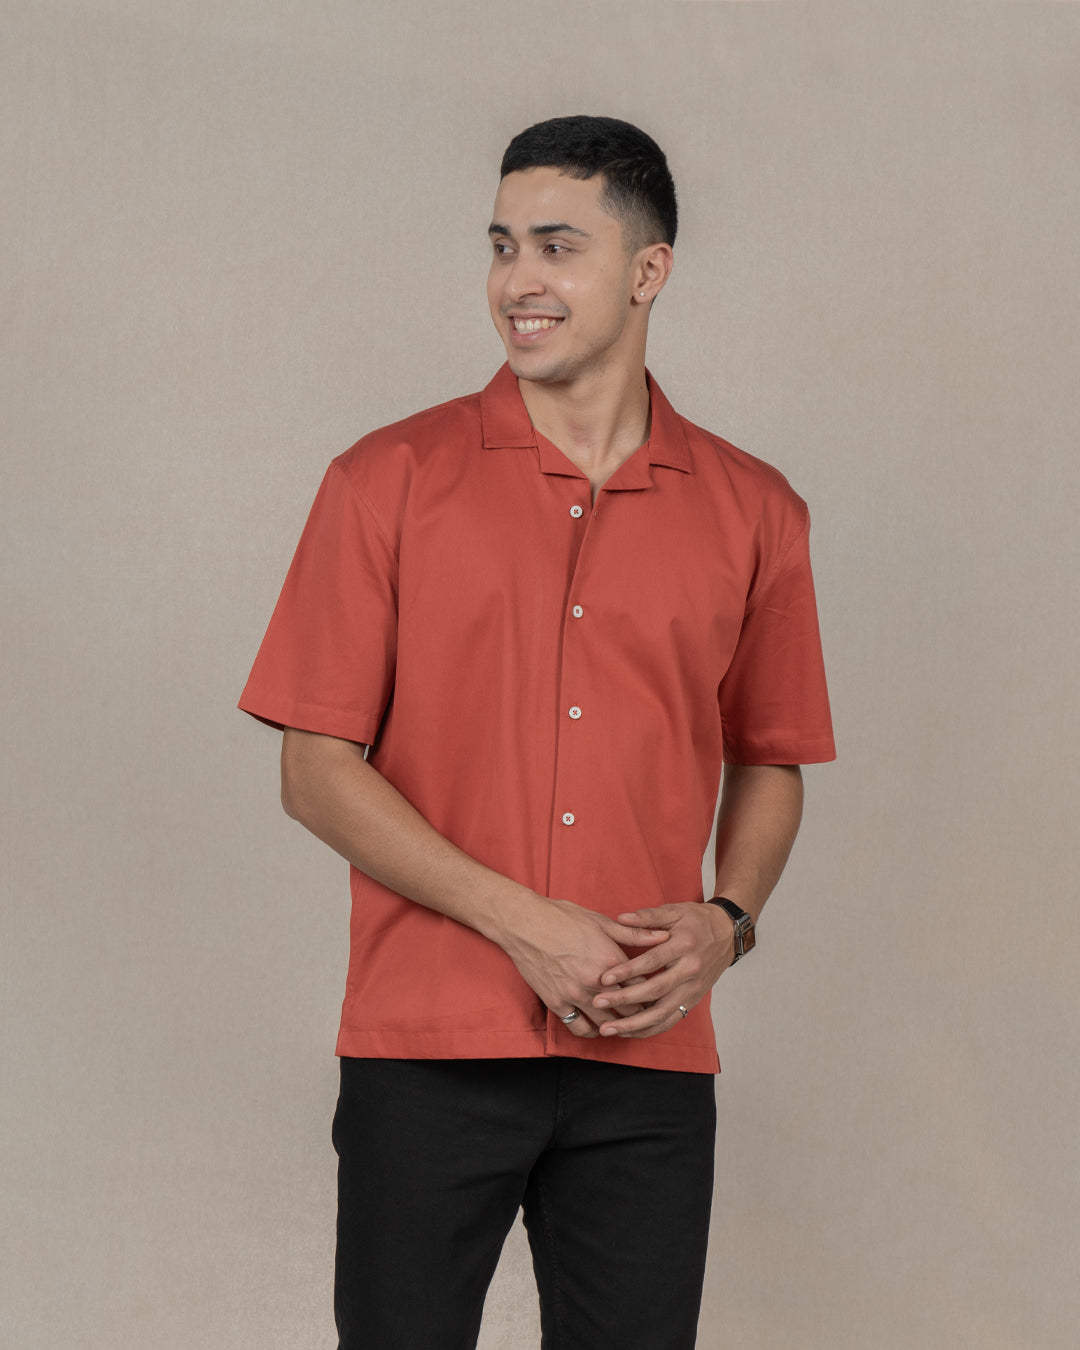 relaxed fit  cuban collar shirt for men. Perfect for Casual wear, outing, travel wear for men